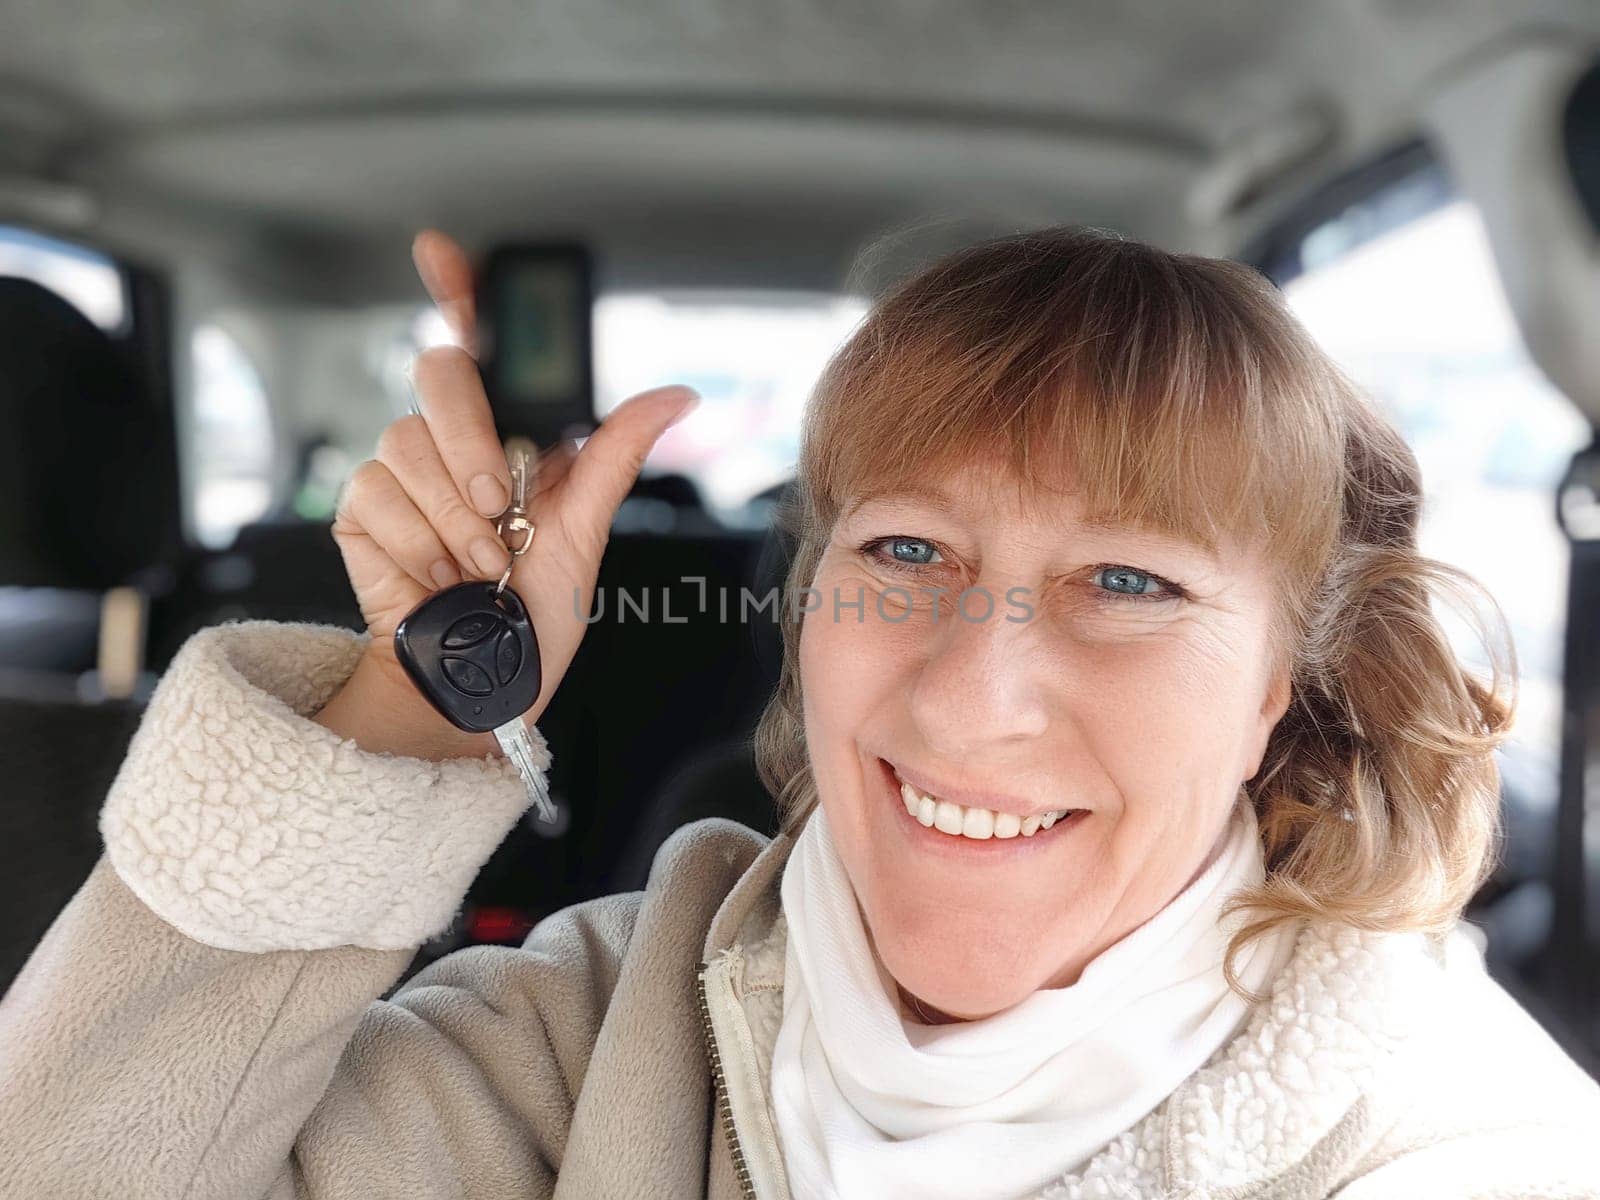 A woman with a bright smile proudly holds up a car key fob while sitting inside her car on chilly winter morning